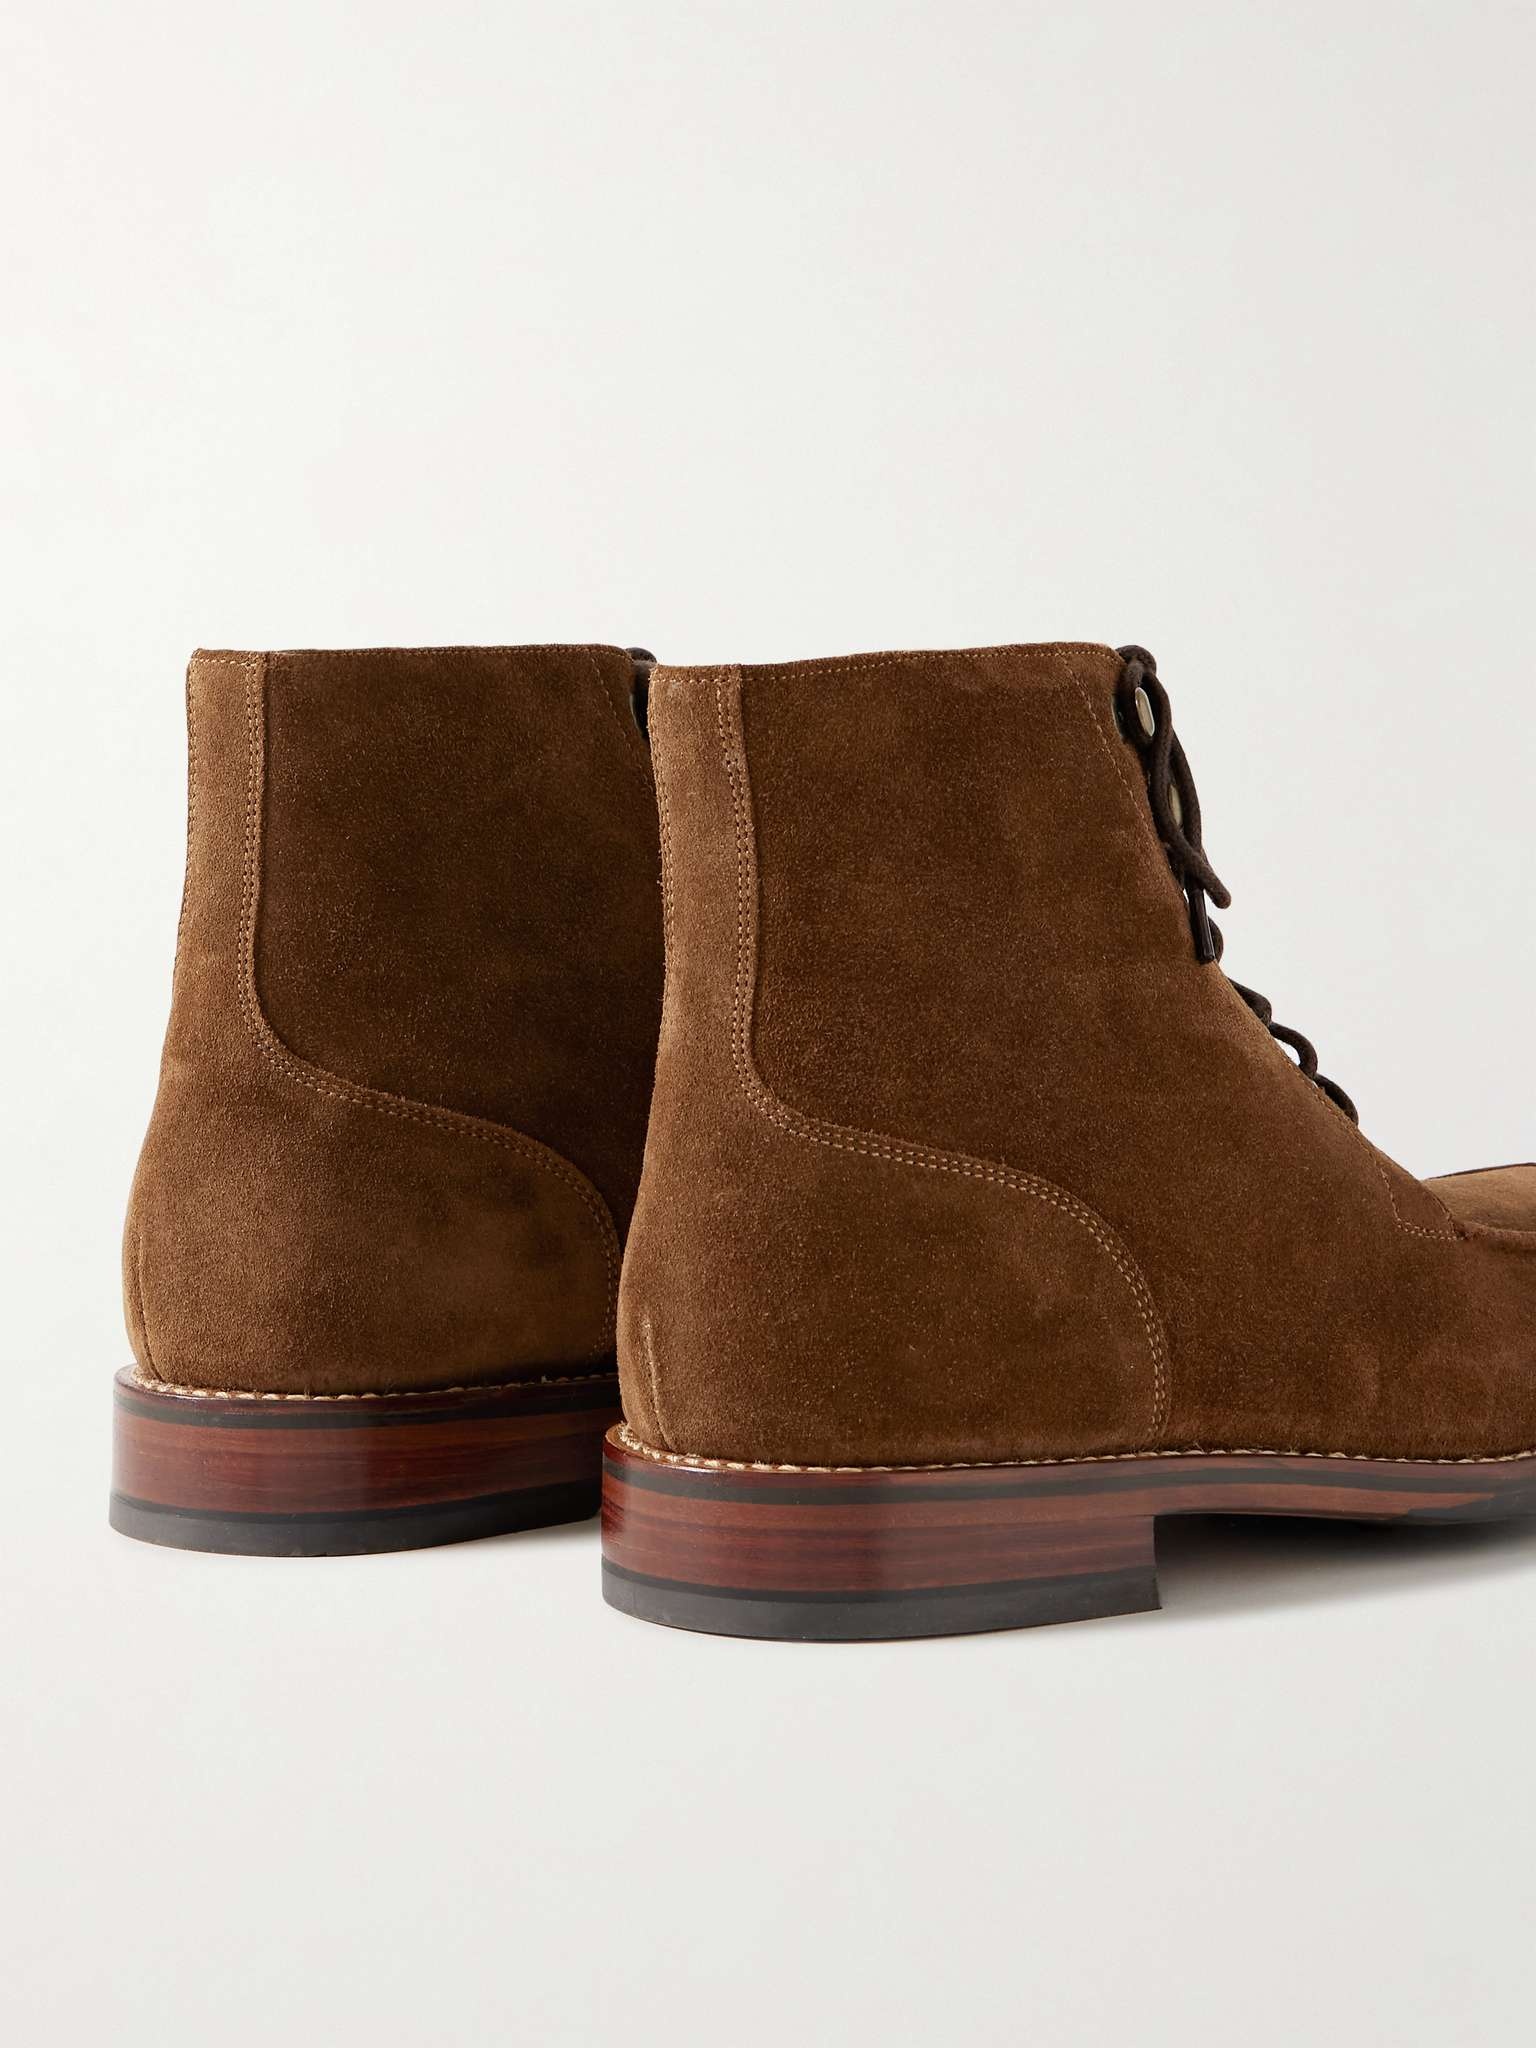 Donald Suede Boots - 5